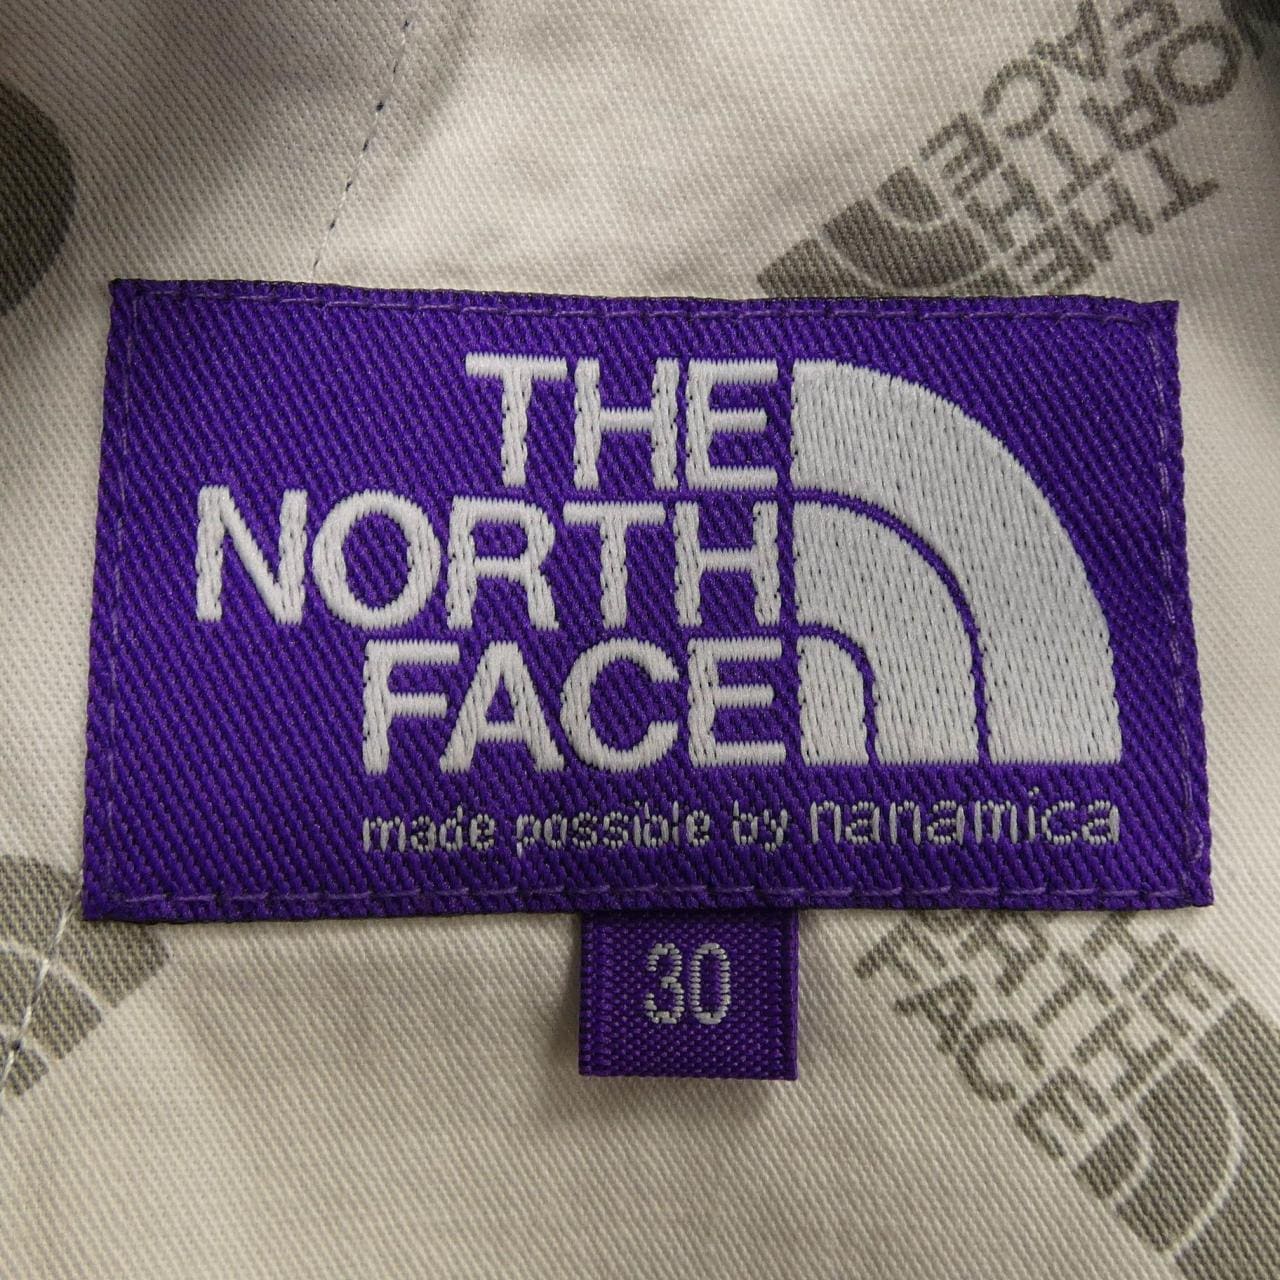 THE NORTH FACE裤子